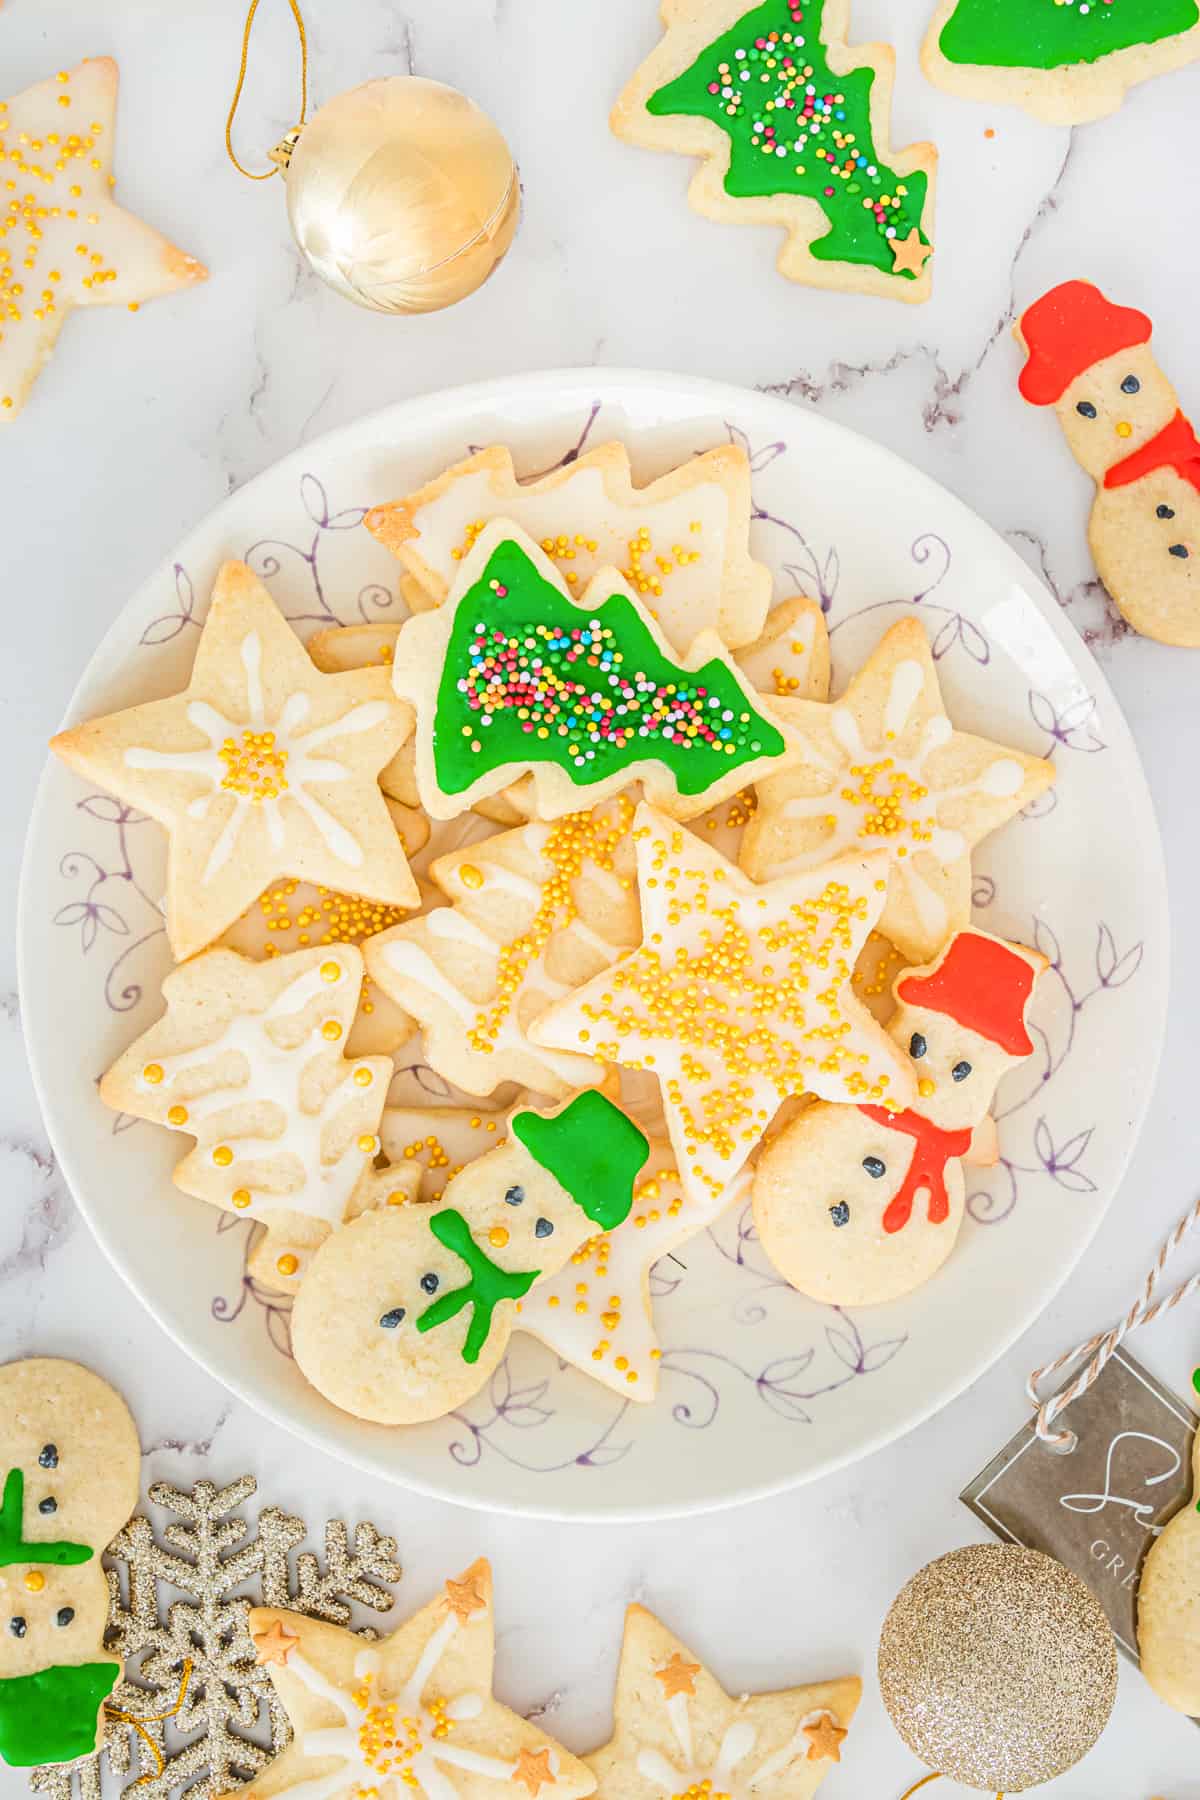 Decorated Christmas sugar cookies with icing and sprinkles on serving plate with additional cookies and Christmas ball ornaments scattered around table